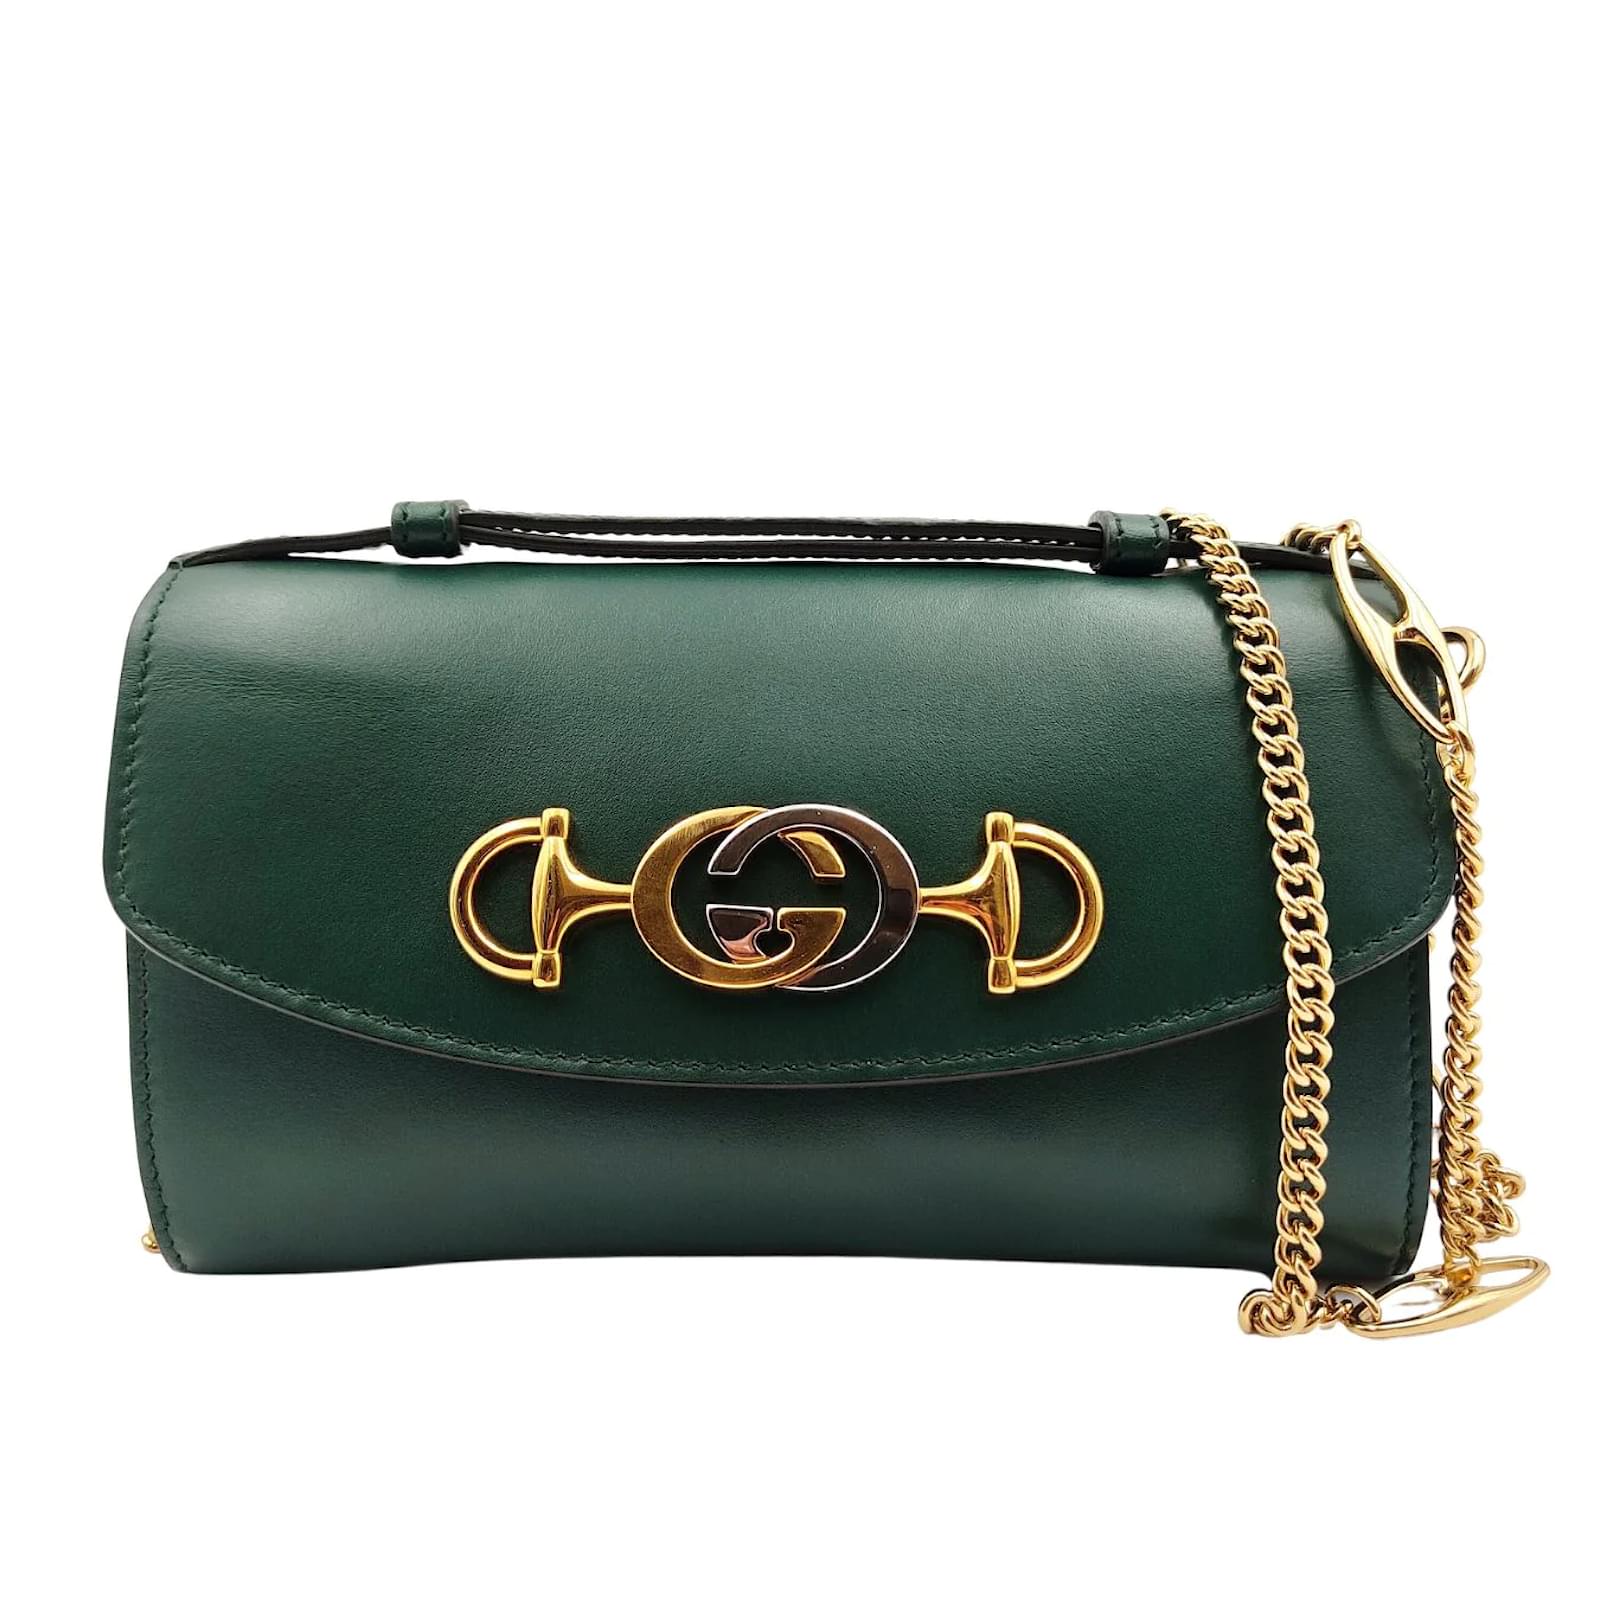 Gucci Horsebit Chain small shoulder bag in green leather